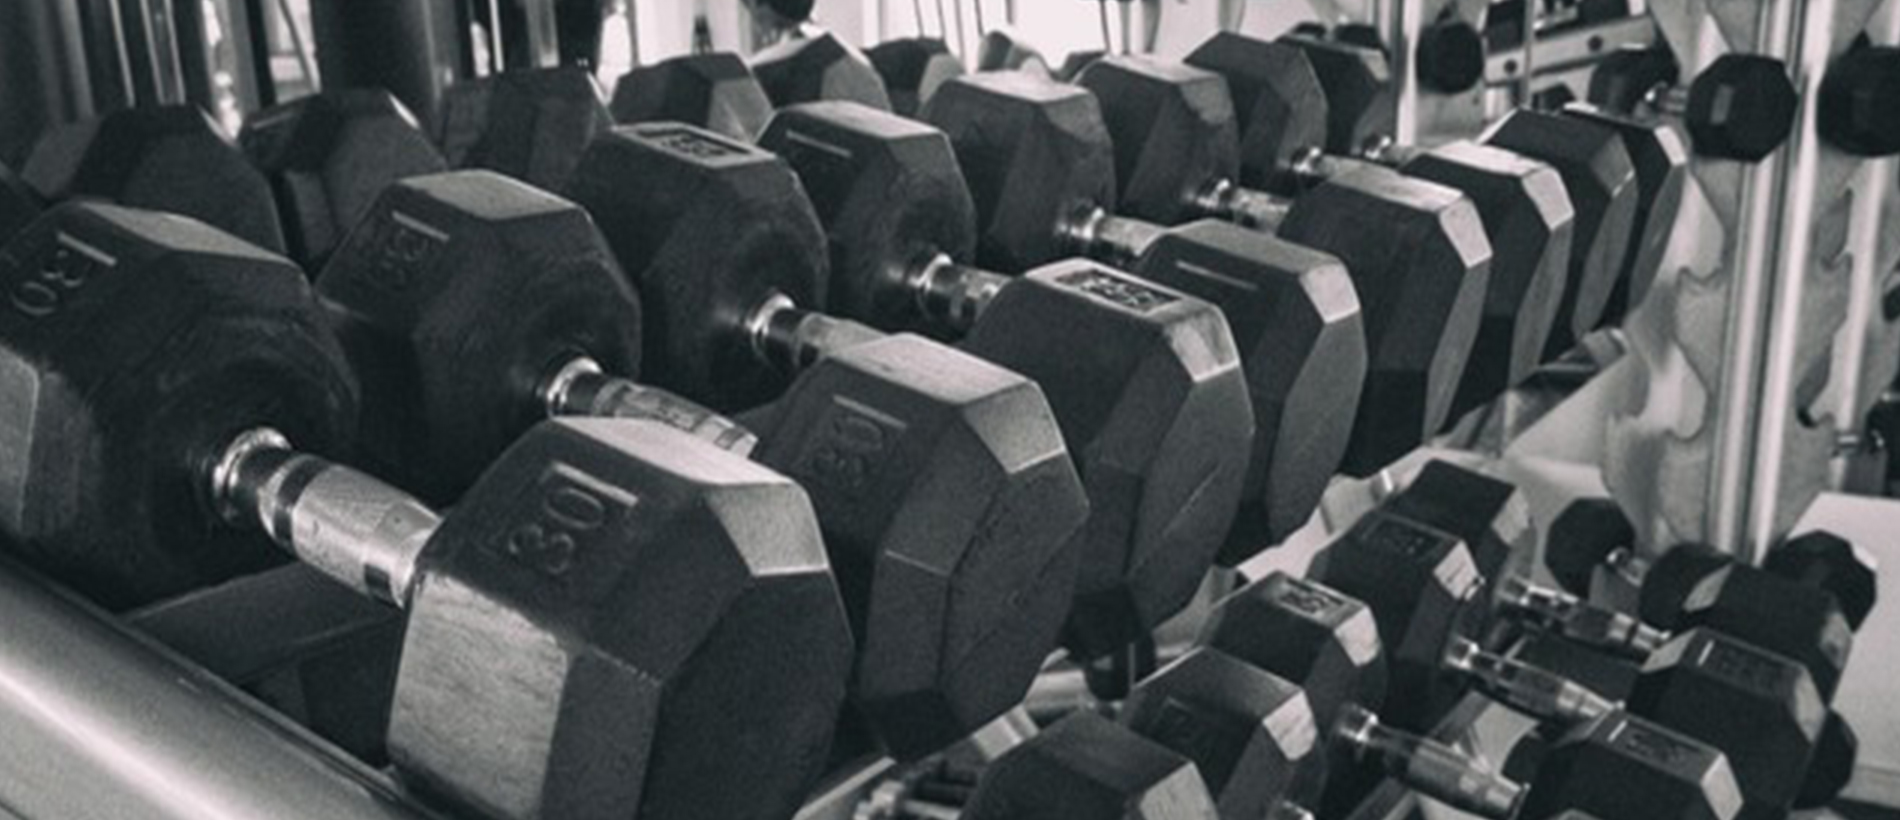 Gym Equipments Repair And Service